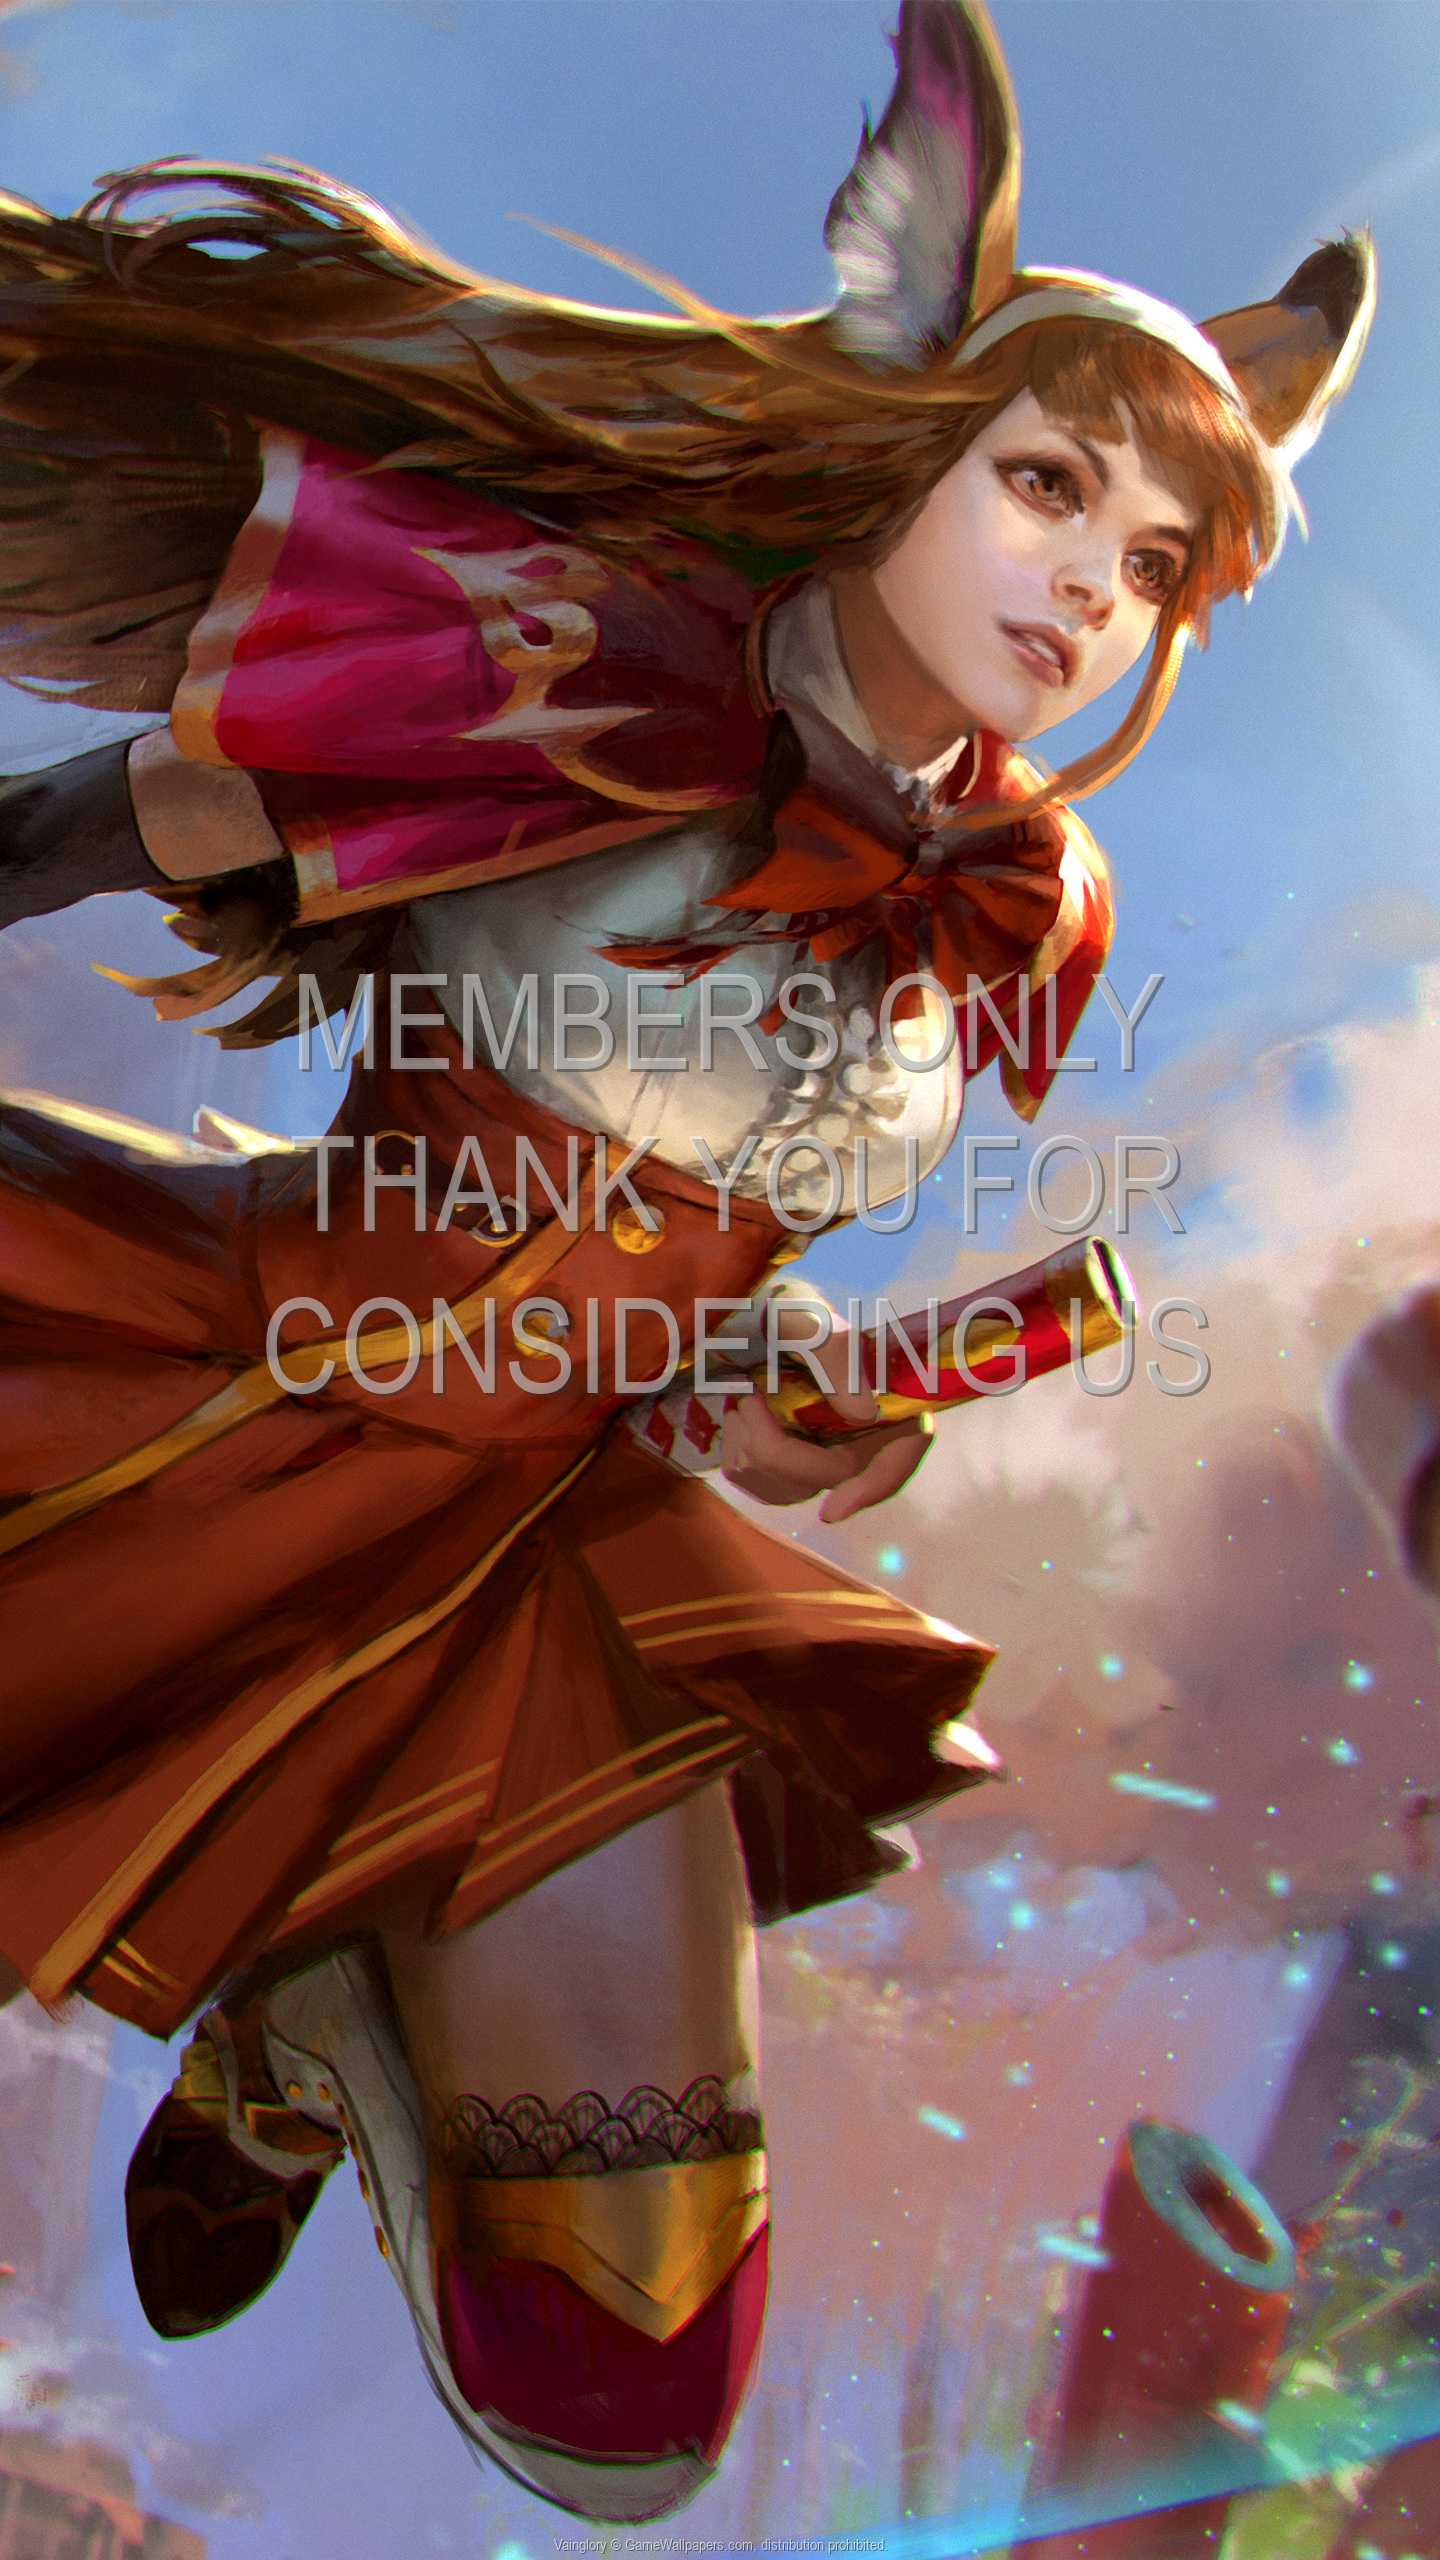 Vainglory 1440p Vertical Mobile wallpaper or background 04